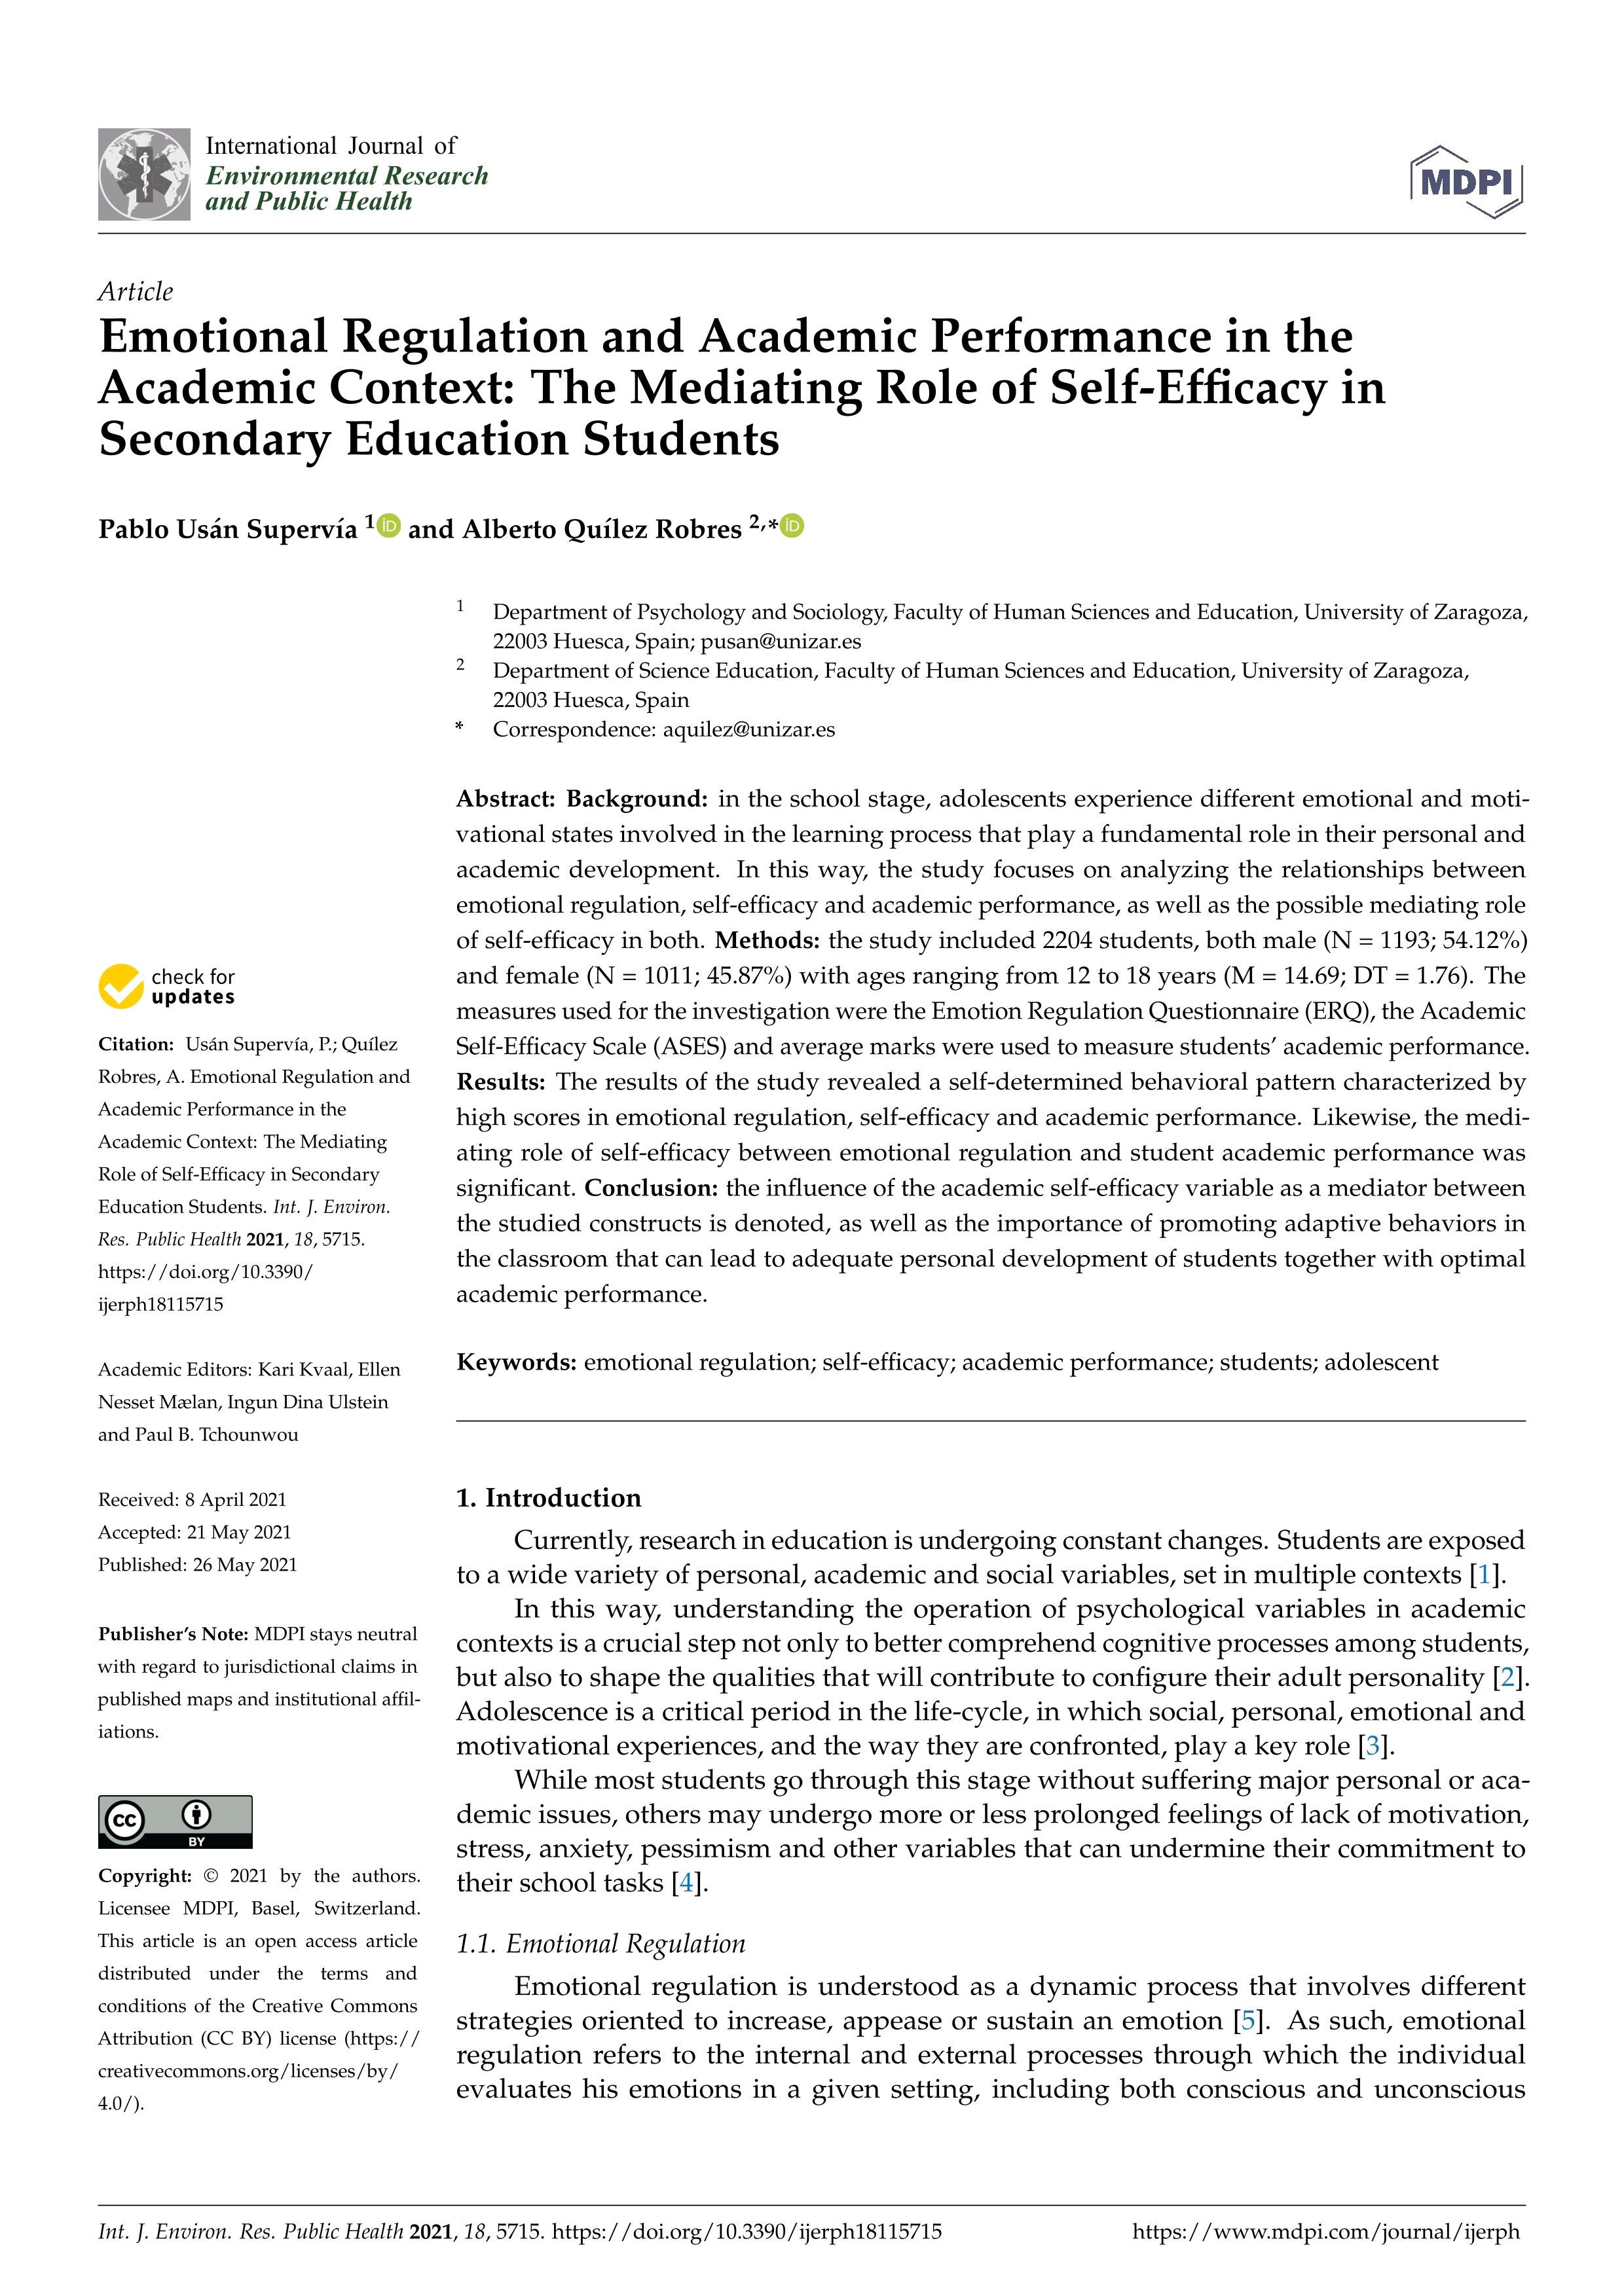 Emotional regulation and academic performance in the academic context: The mediating role of self-efficacy in Secondary Education students